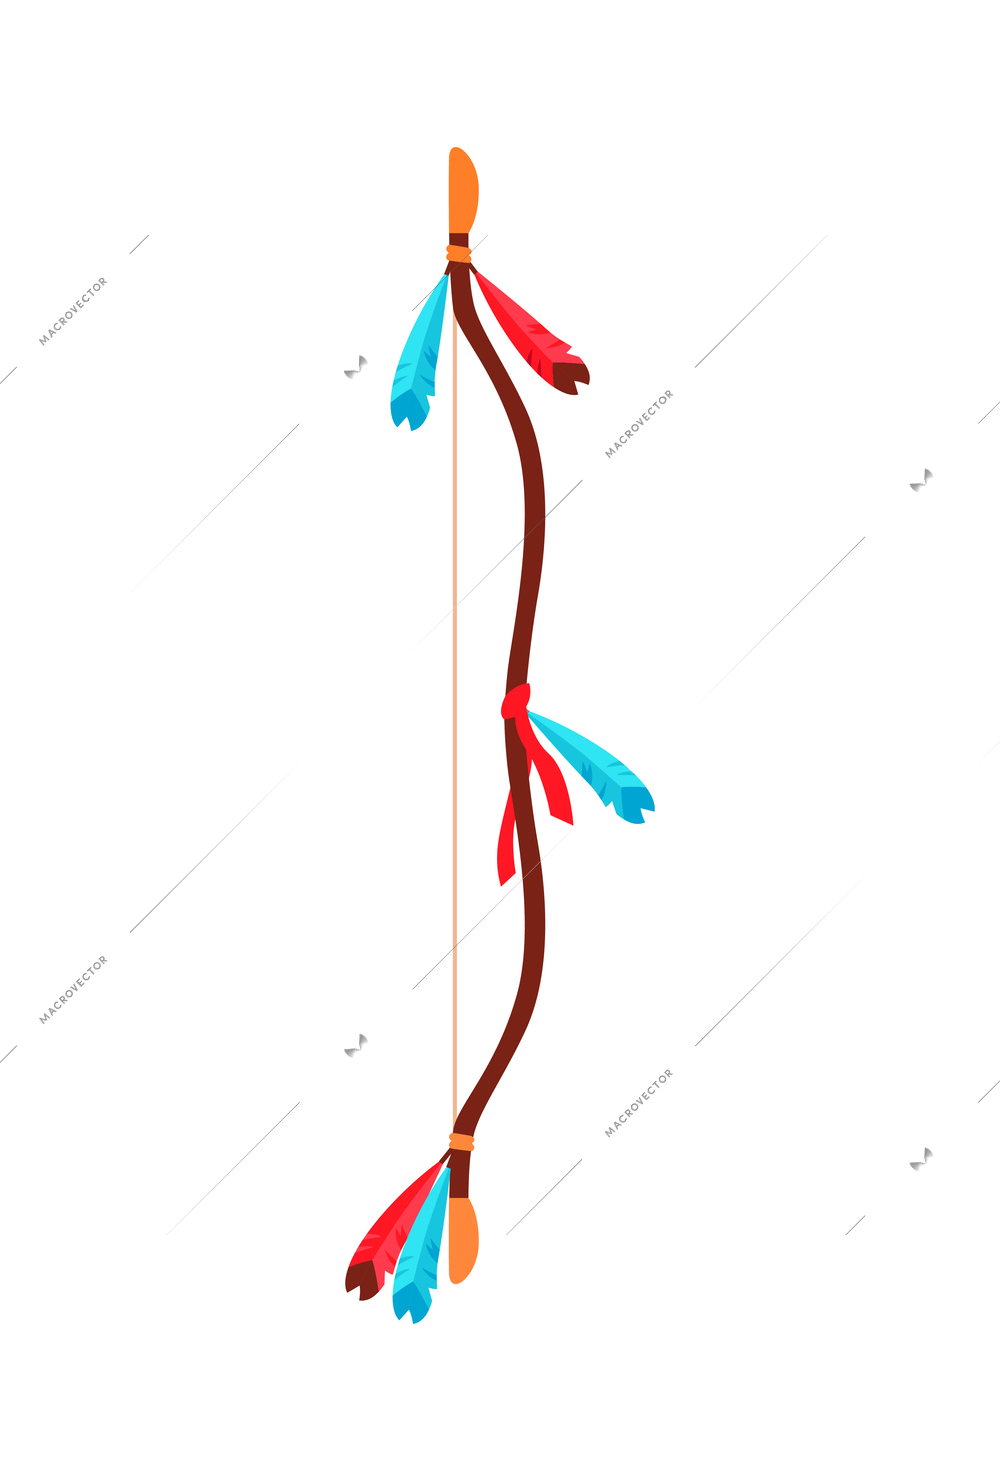 Flat mayan or indian bow with feathers vector illustration